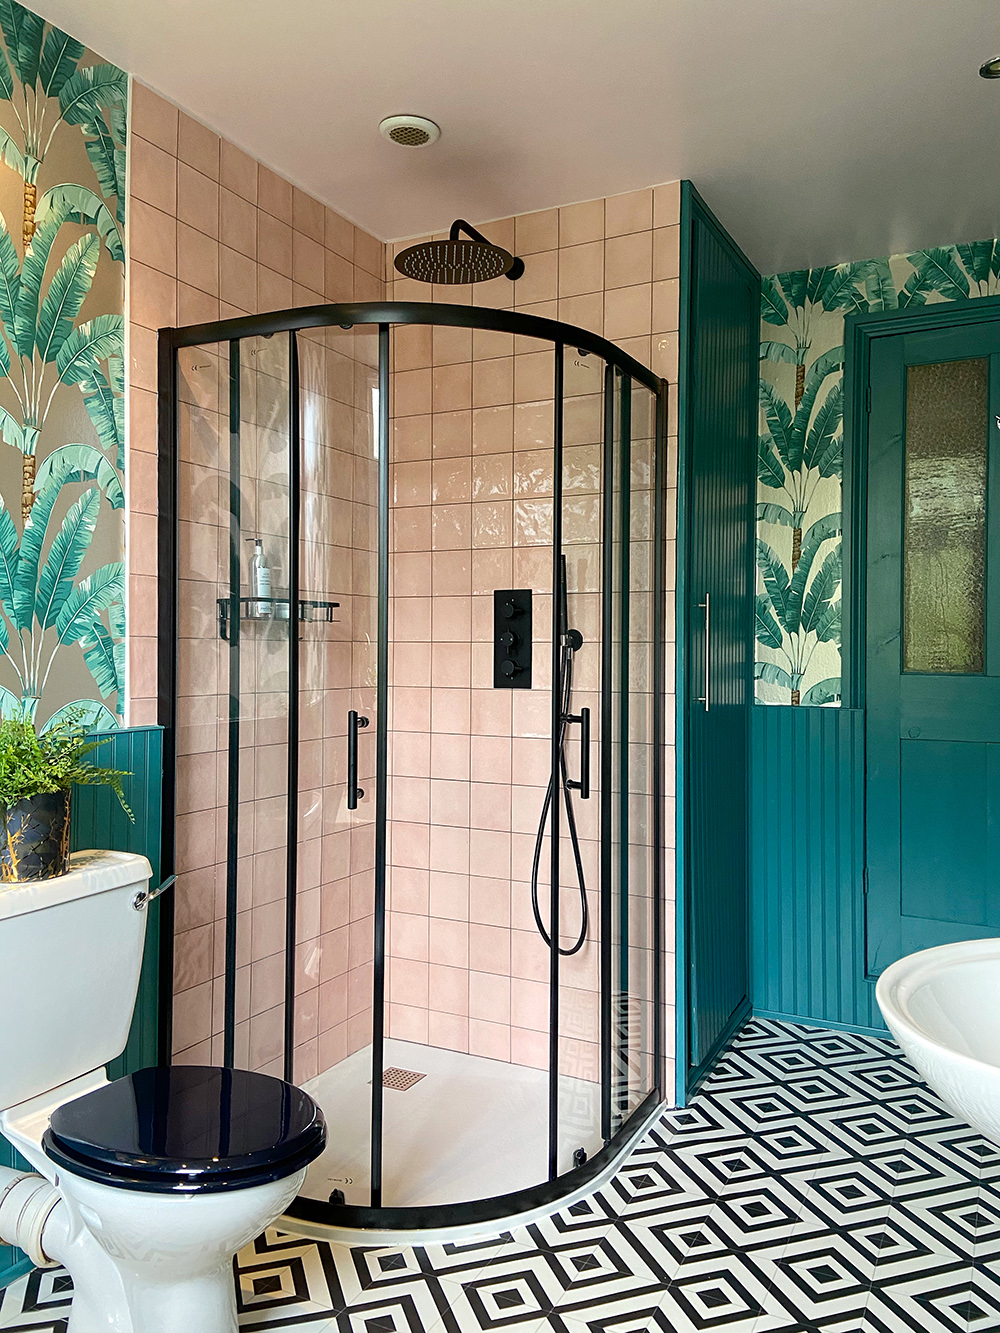 Tropical bathroom inspiration. Blush pink tiles paired with black shower enclosure, tropical patterned wallpaper and monochrome patterned floor